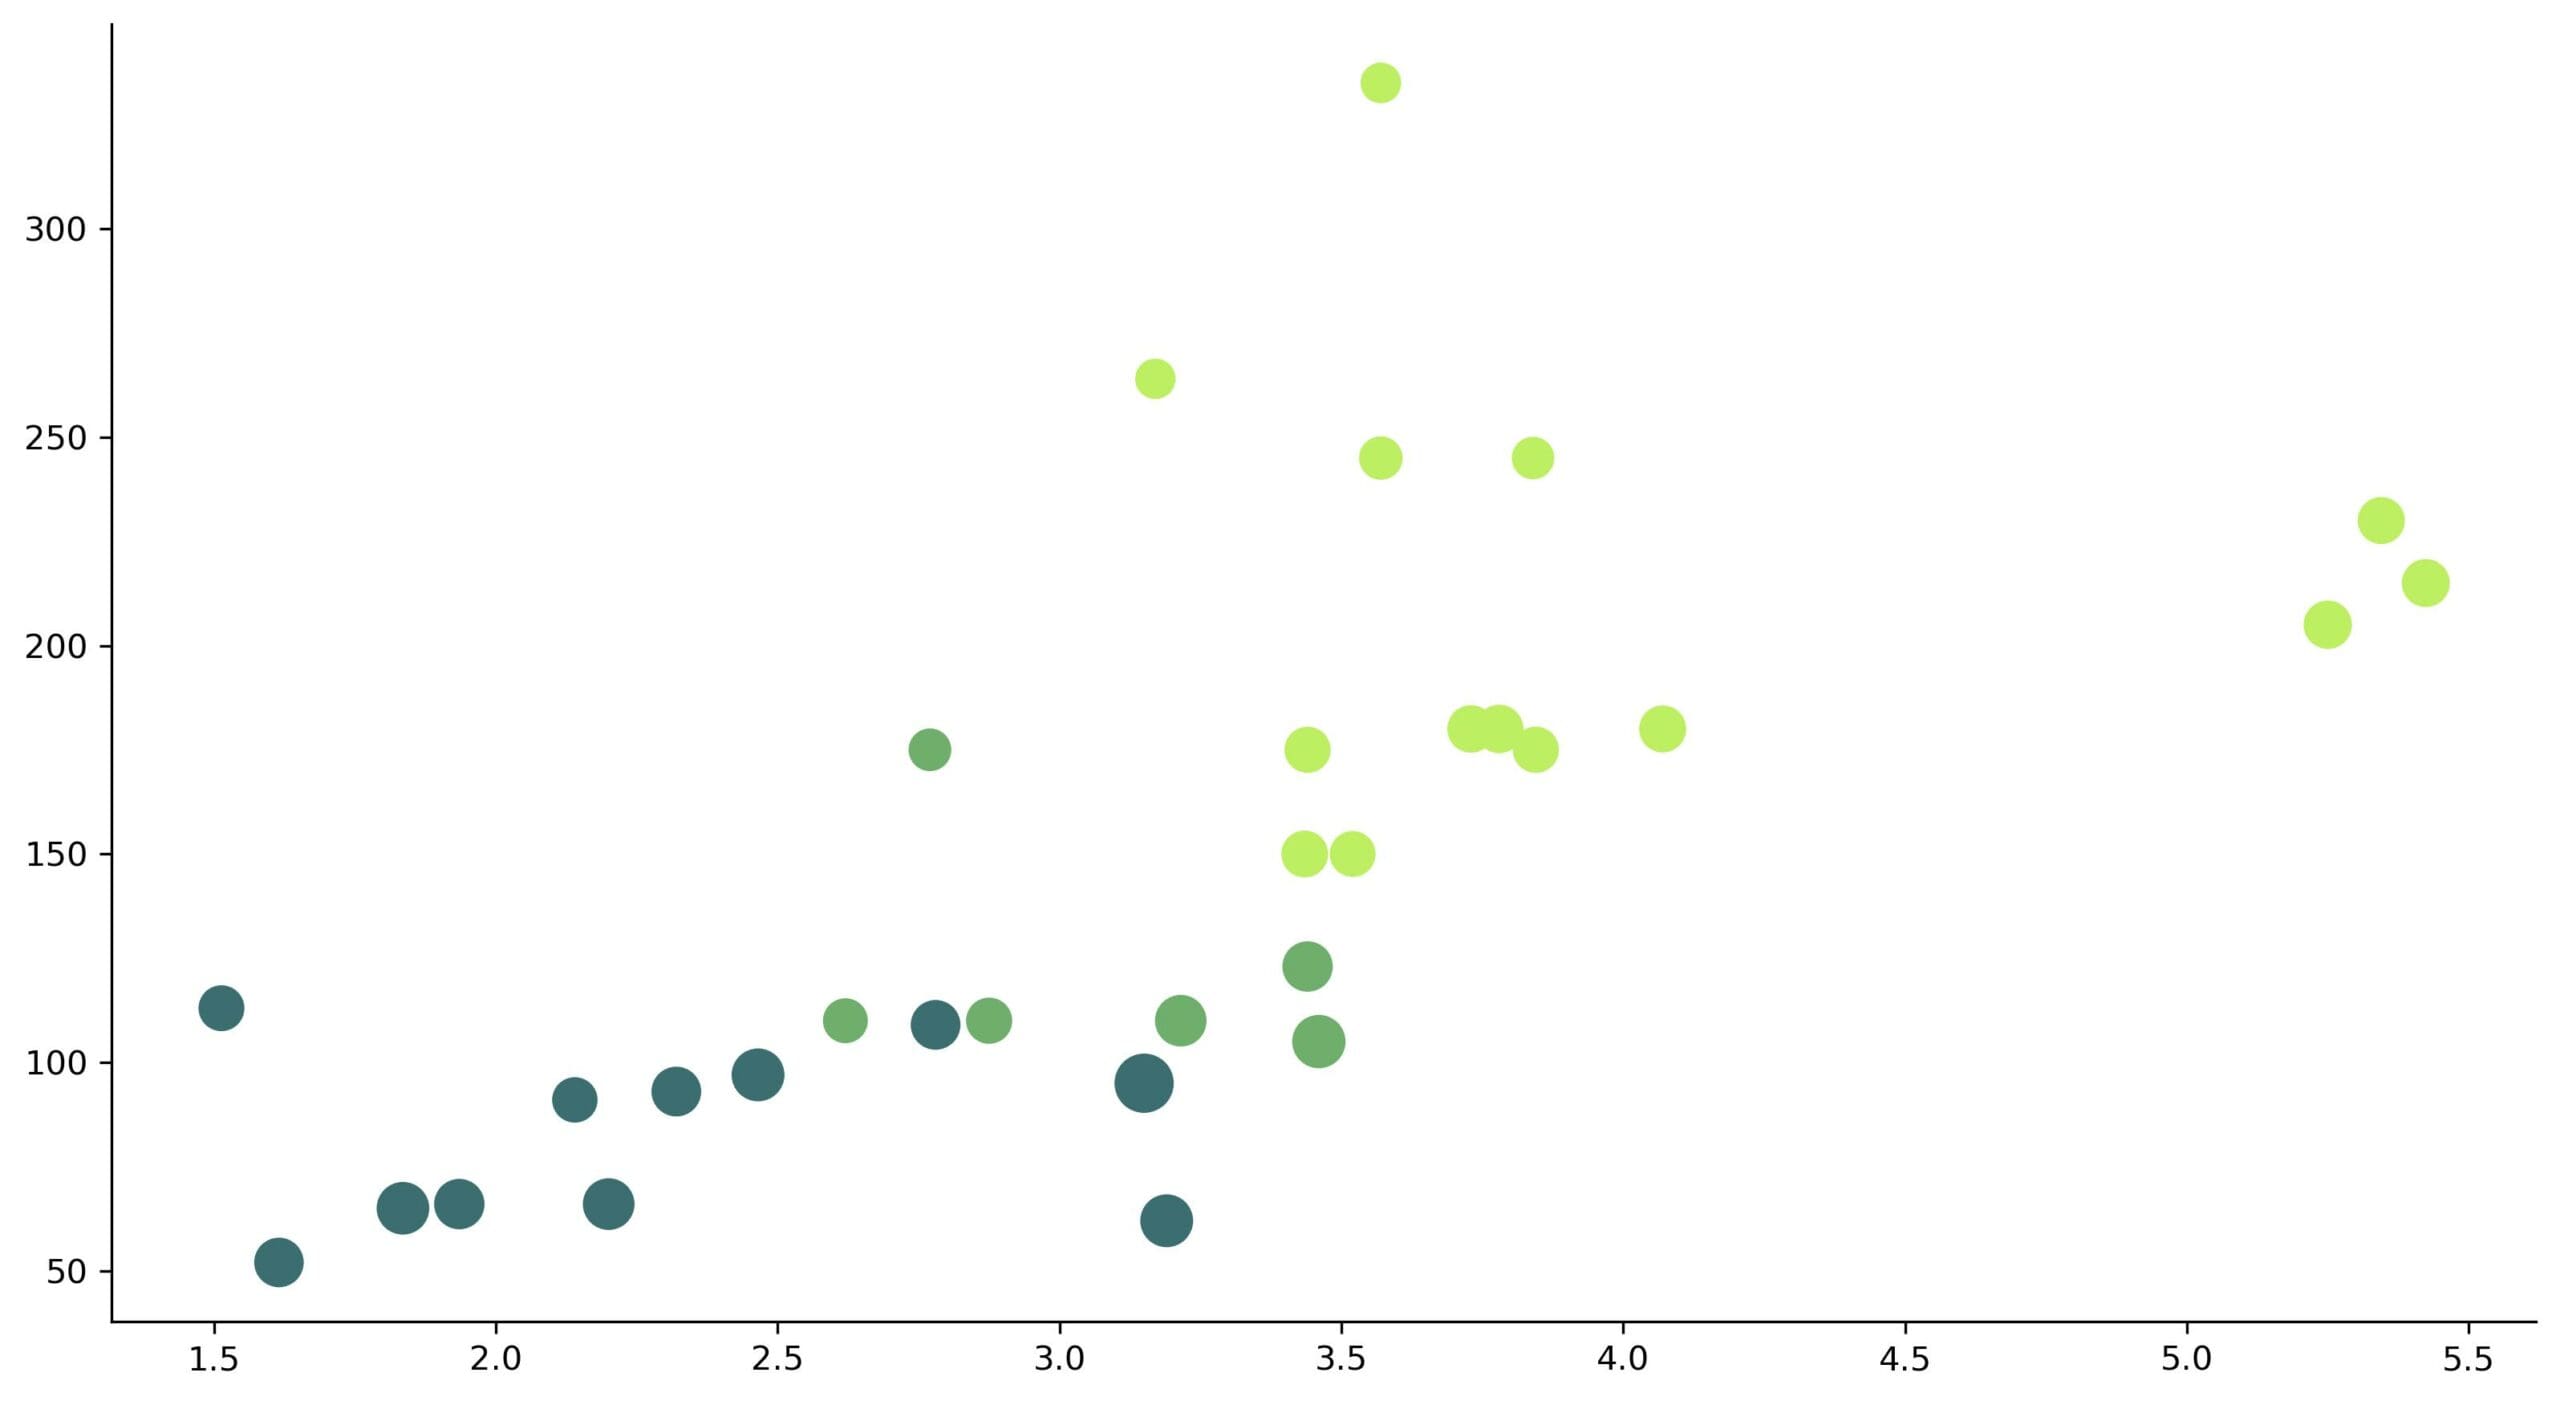 Image 7 - Scatter plot generated by Python and matplotlib